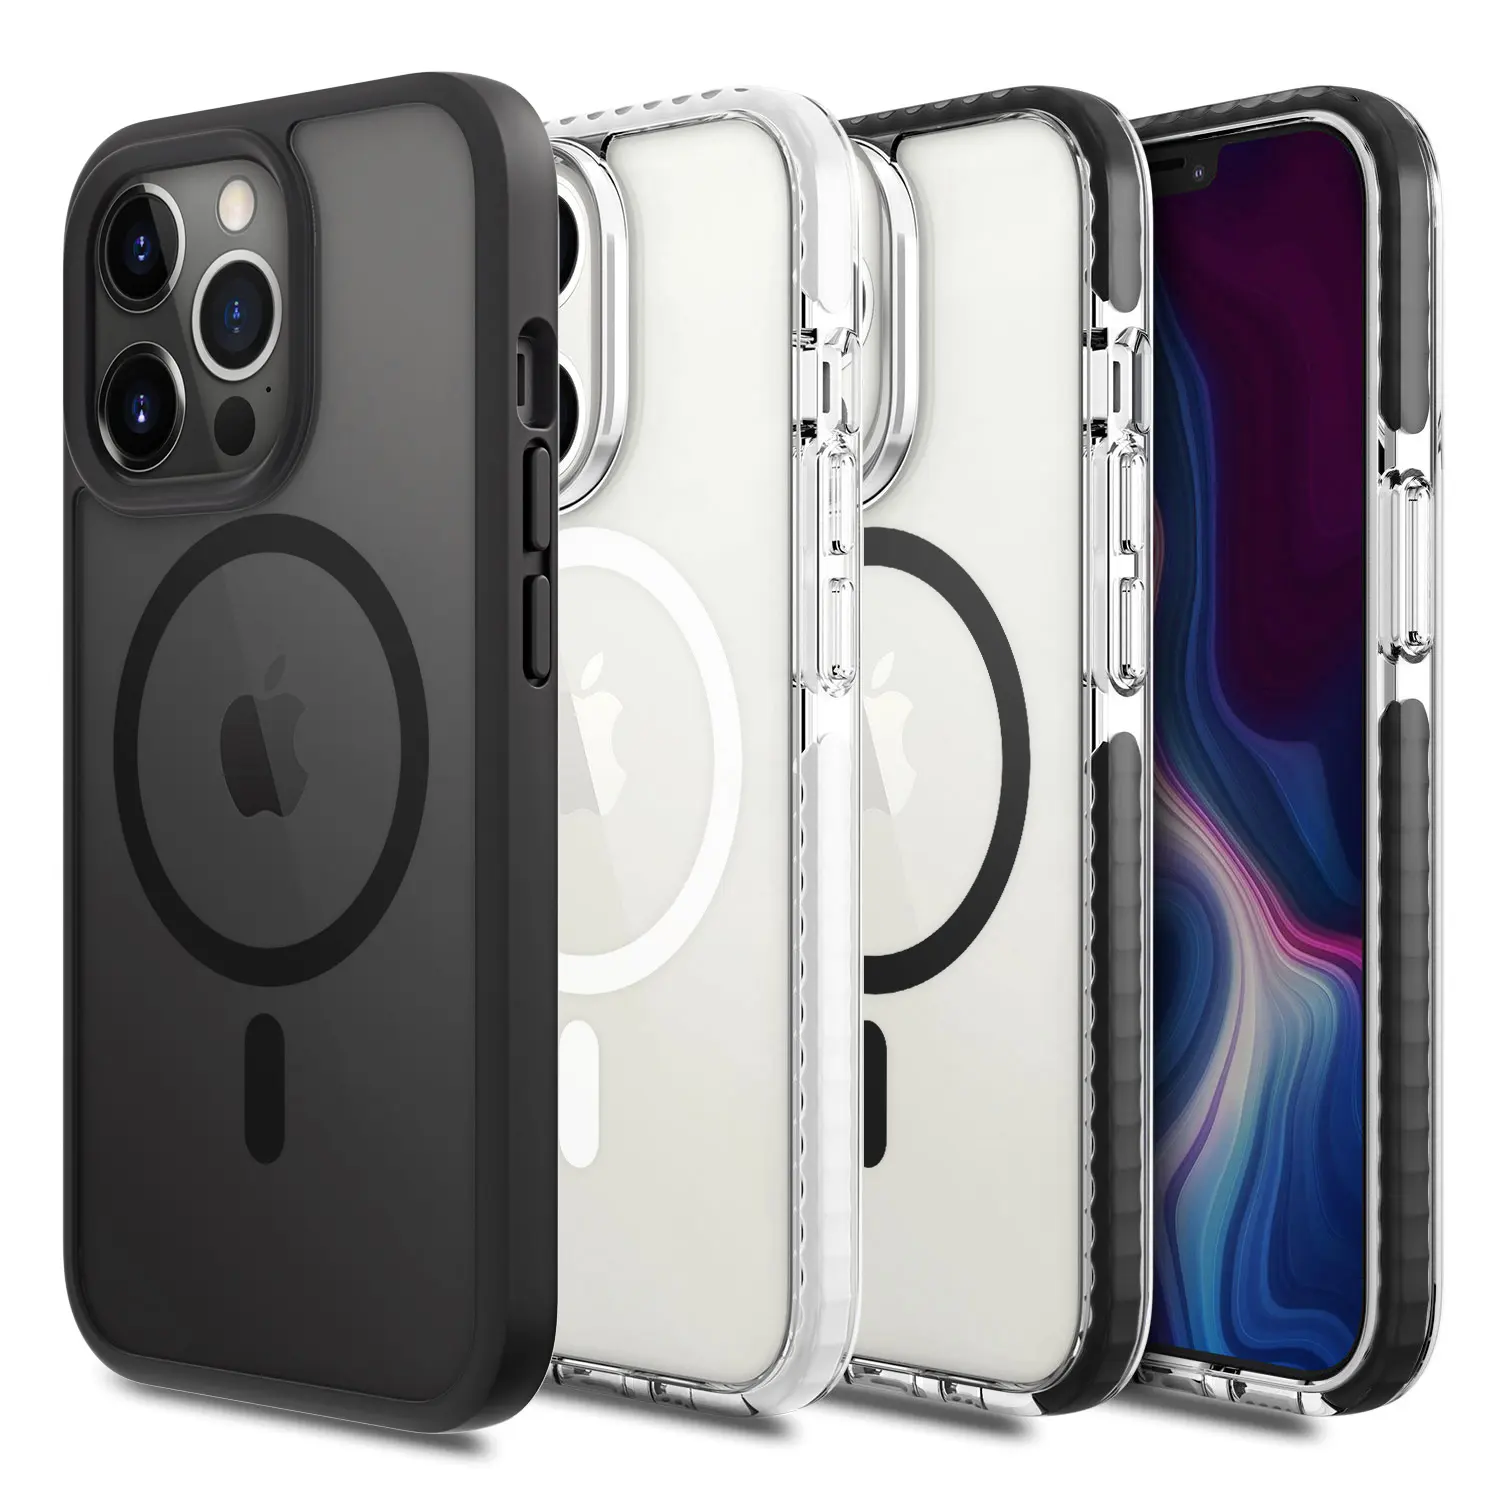 New Arrival Clear Magnetic Protective Cover Magsafes Case TPU TPE PC Hard Shockproof Impact for Iphone 13 12 Mini Pro Max X XS